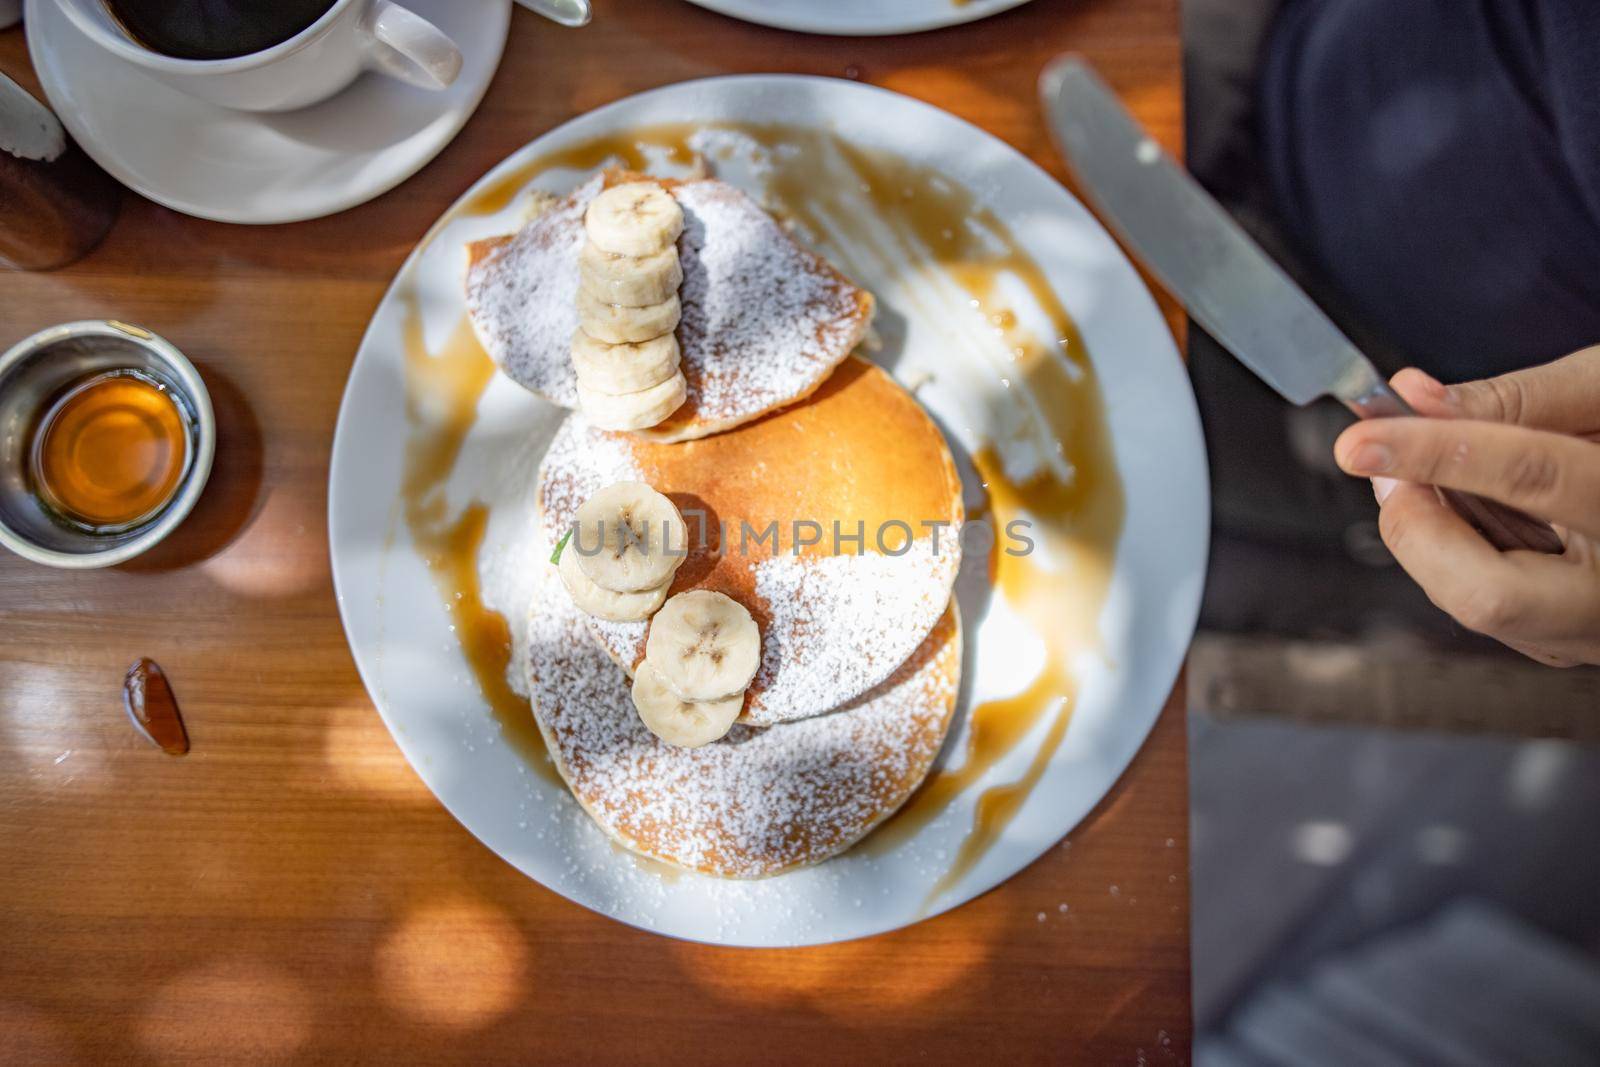 Hand holding knife above tasty pancakes with powdered sugar and bananas by Kanelbulle